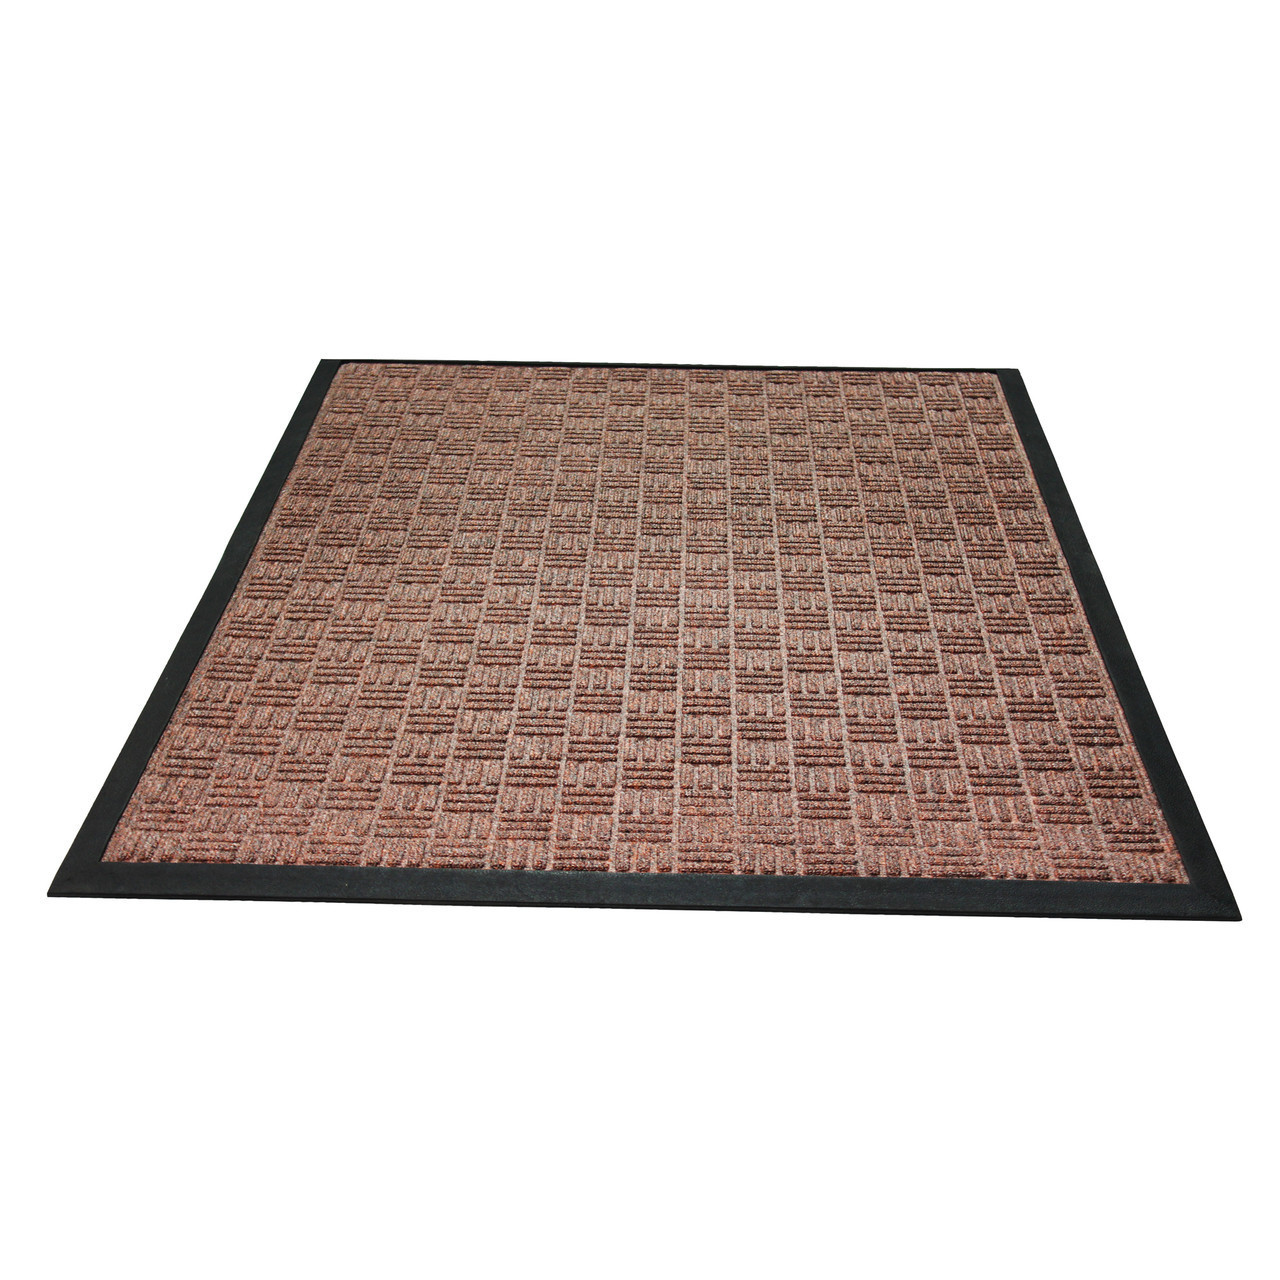 https://cdn11.bigcommerce.com/s-fjwps1jbkv/images/stencil/1280x1280/products/346/3737/ultralux-premium-indoor-outdoor-entrance-mat-or-absorbent-strong-anti-slip-entry-rug-heavy-duty-doormat-or-brown__30289.1688994511.jpg?c=2?imbypass=on